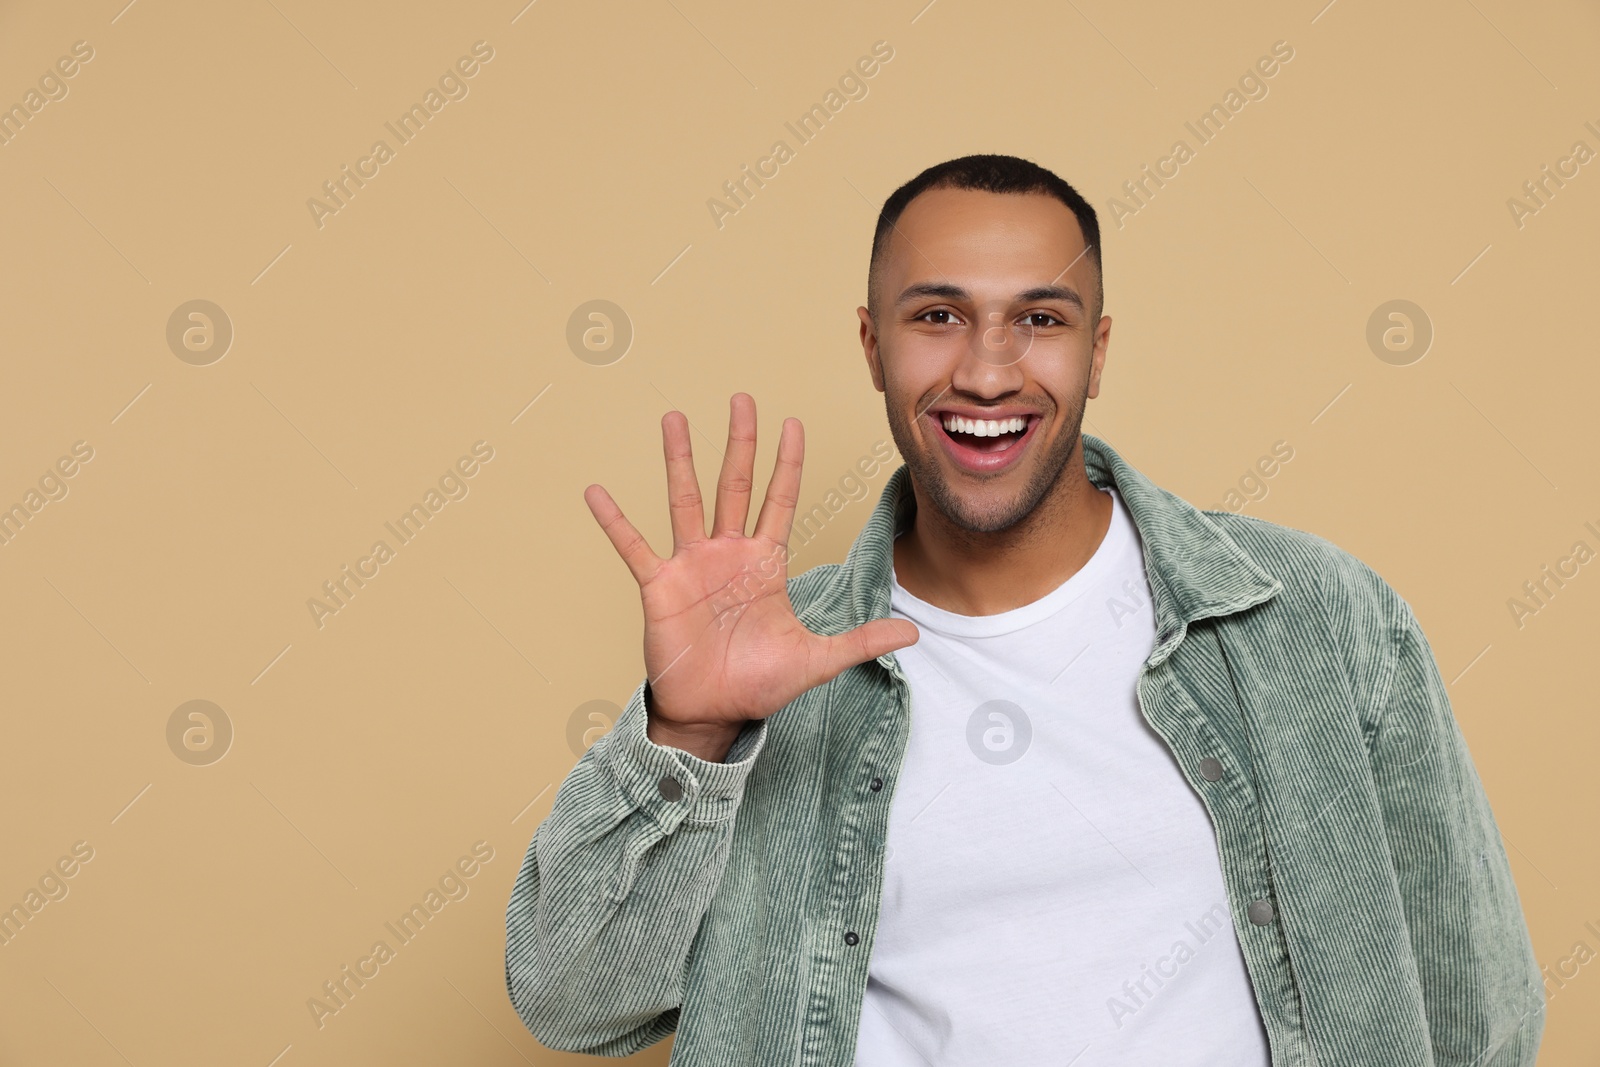 Photo of Man giving high five on beige background. Space for text